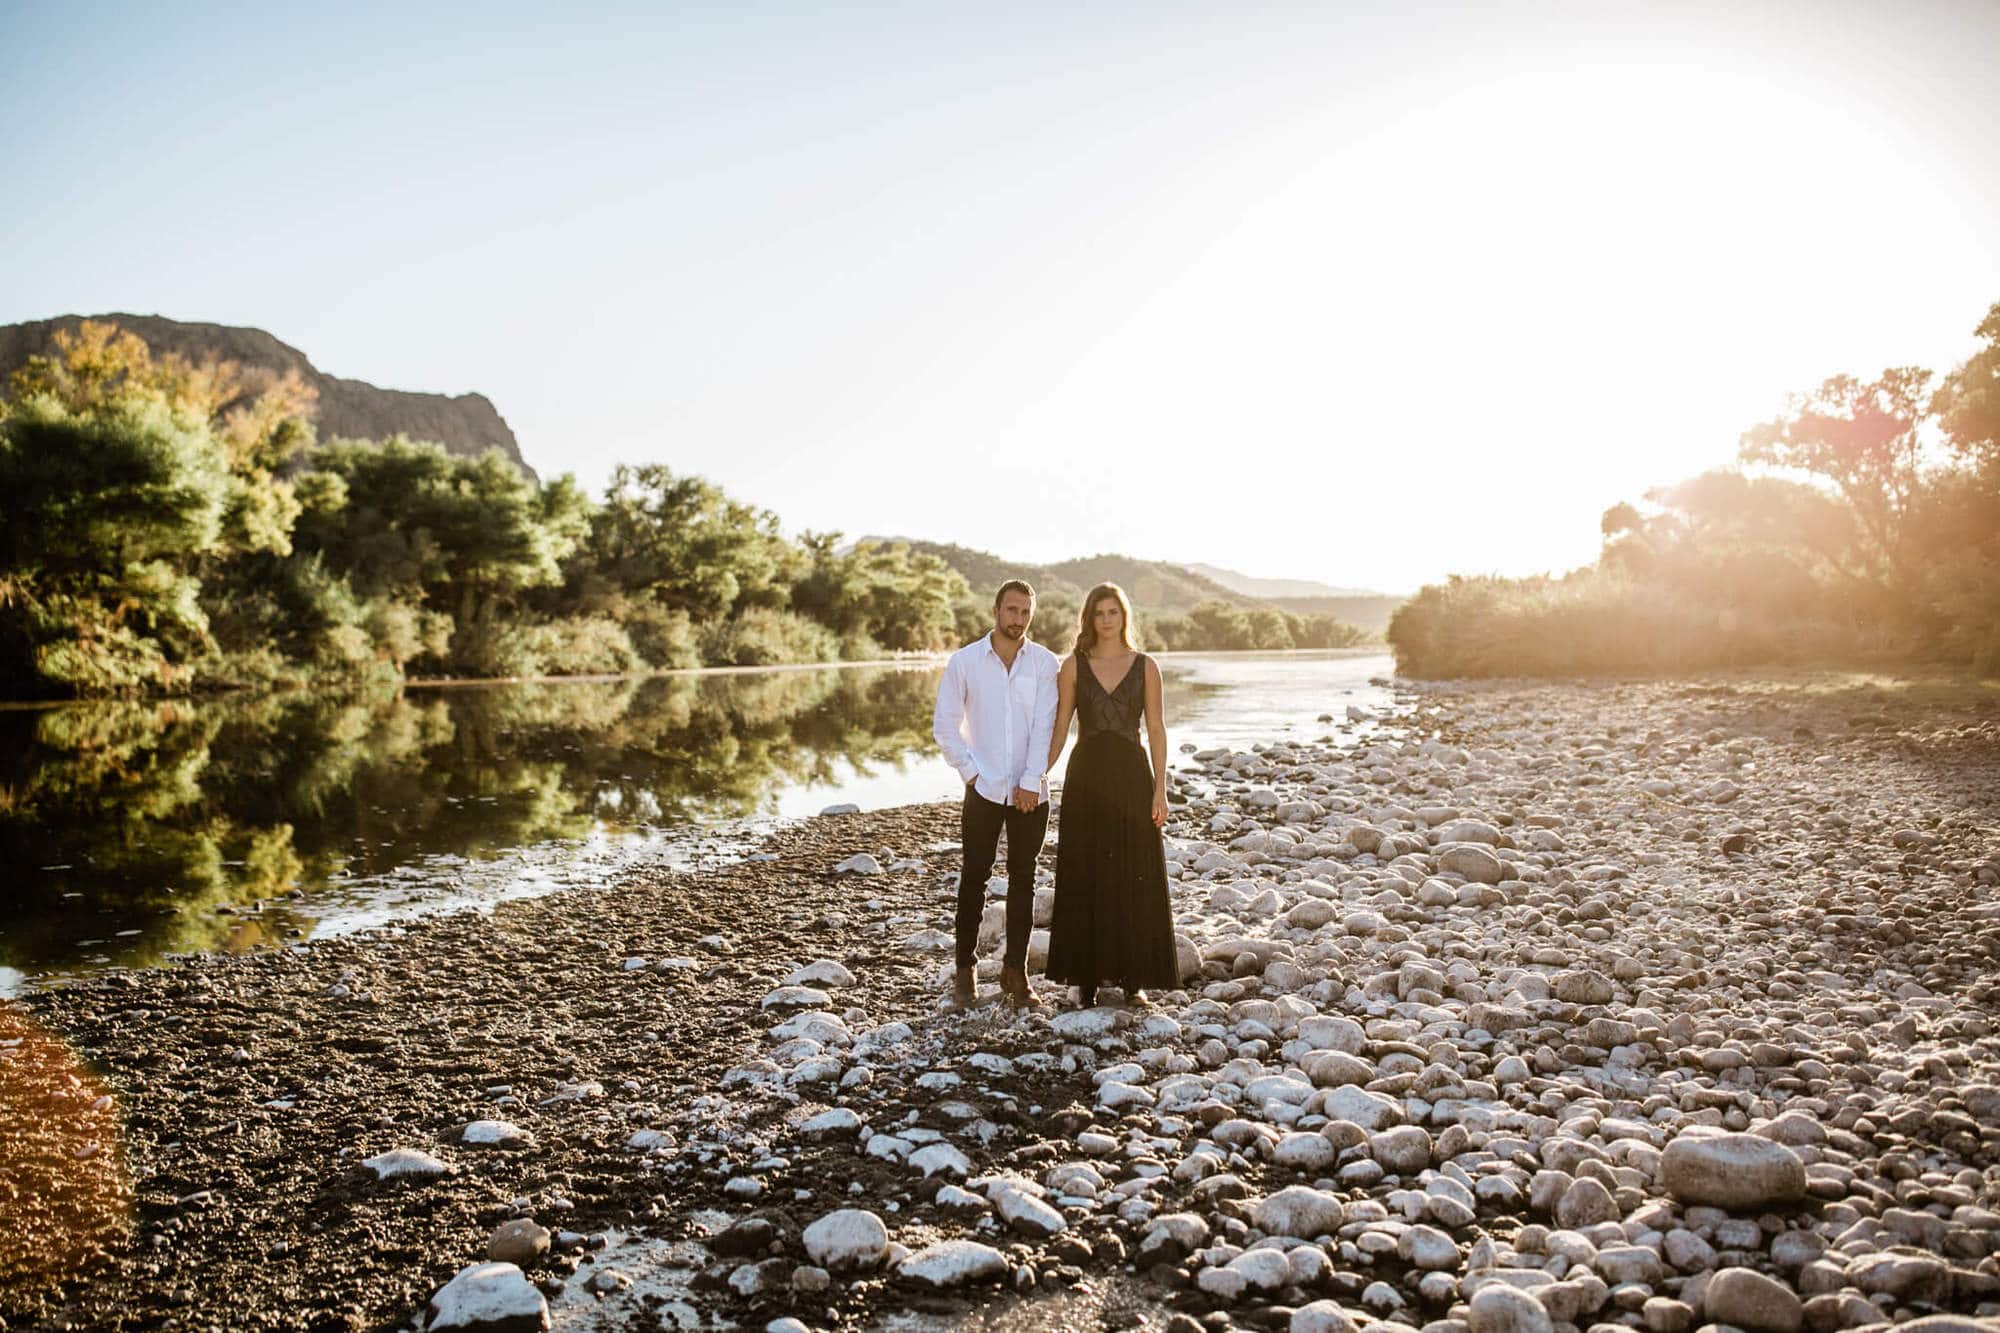 The adventurous couple stand hand in hand with the Salt River extending behind them.